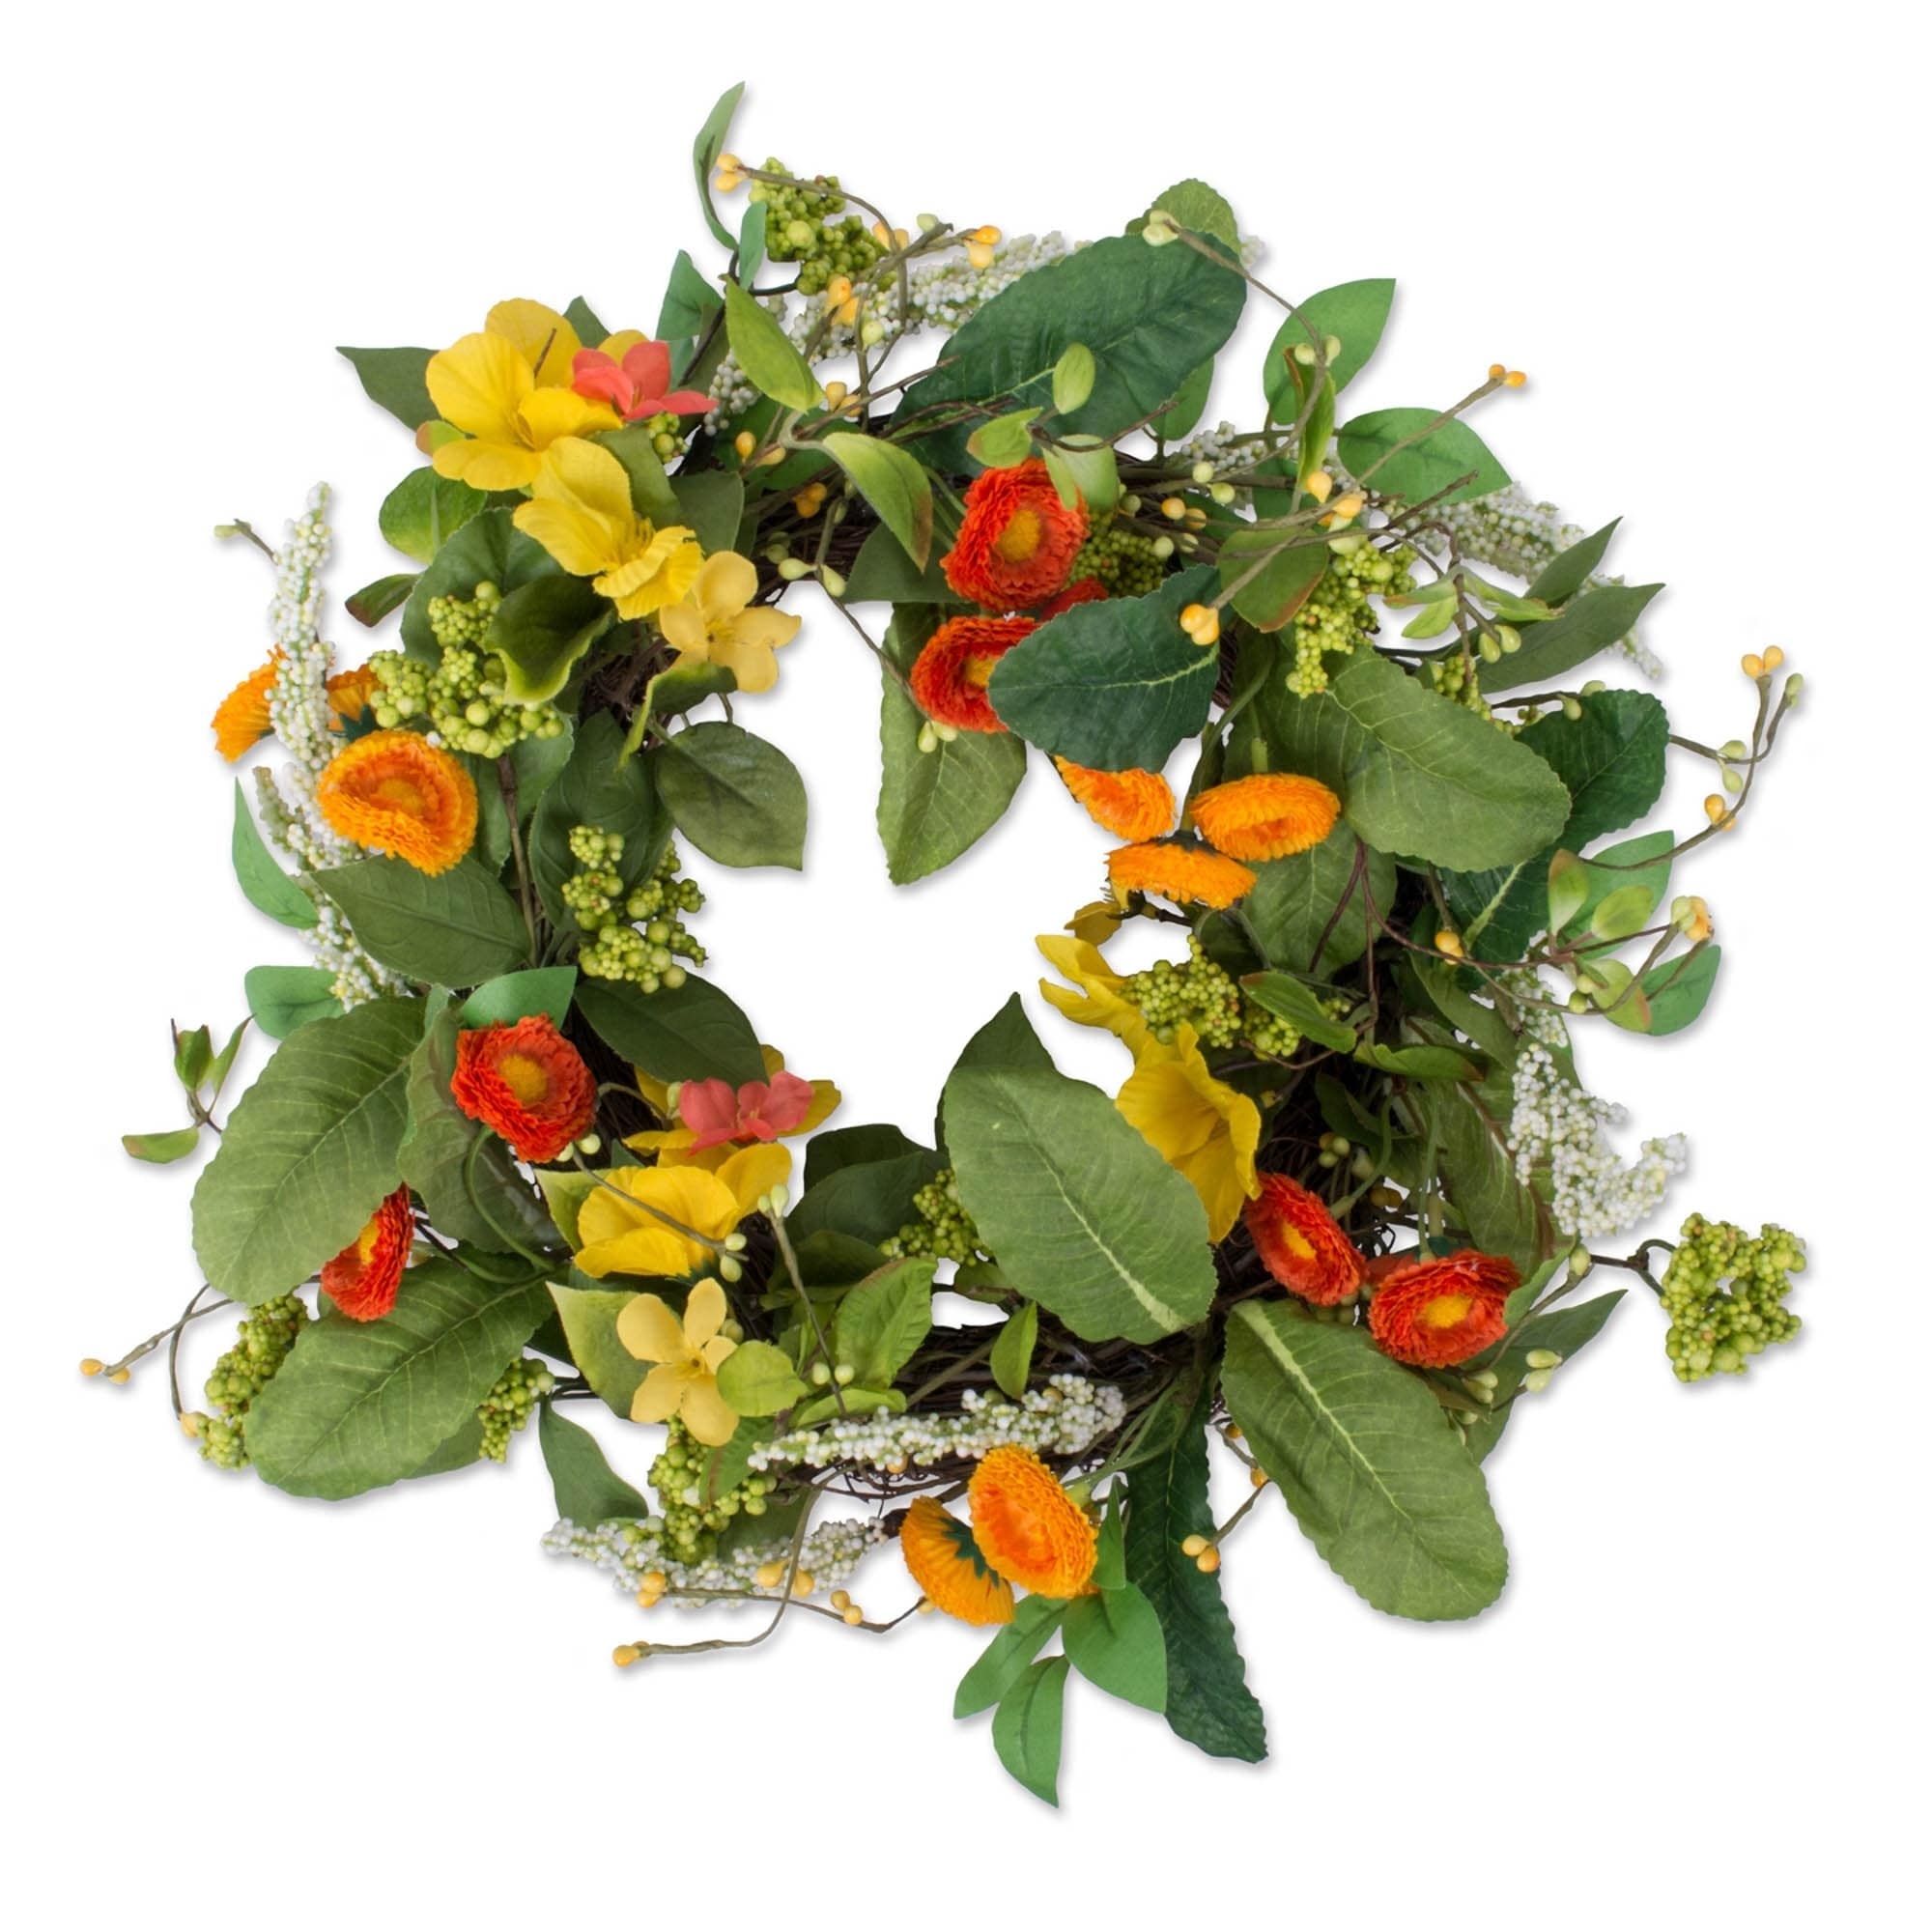 Dii Decorative Leaves Flowers 16 Summer Wreath For Front Door Or Indoor Wall Decor To Celebrate Spring Summer Season Camz37426 Home Decor Accents Wreaths